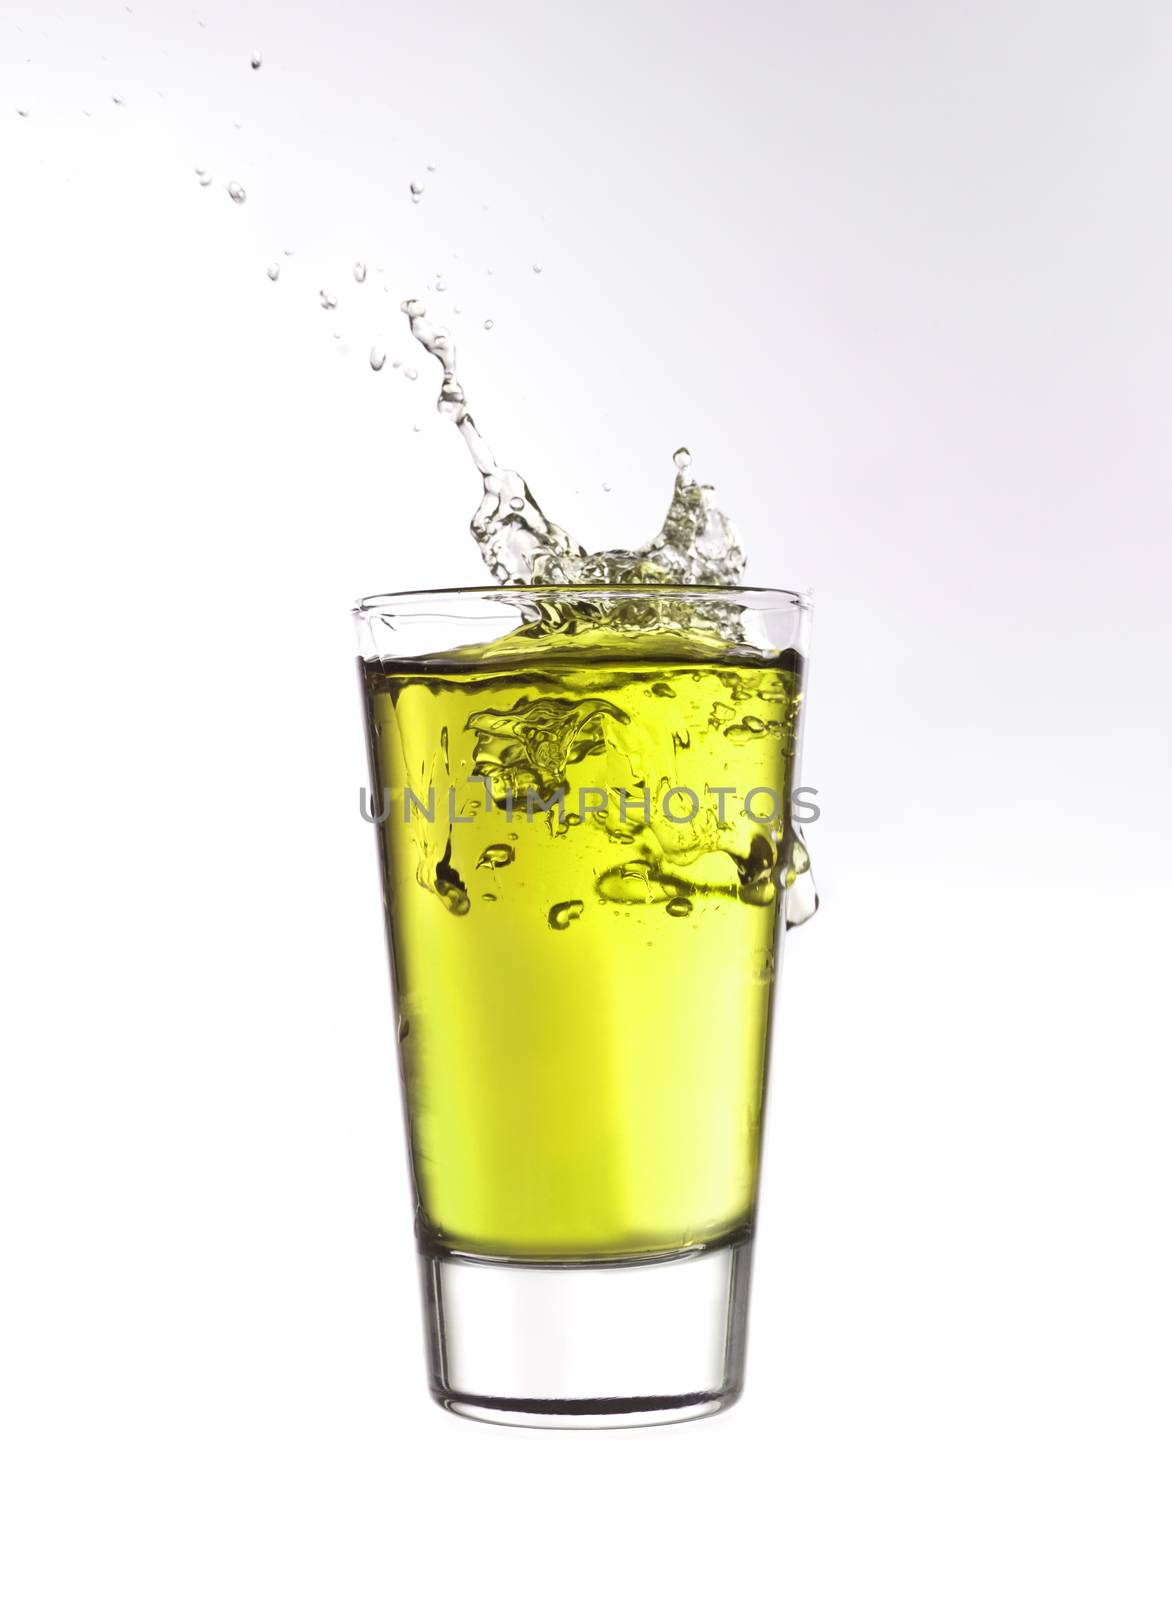 Splash in a glass of yellow lemonade isolated on white background